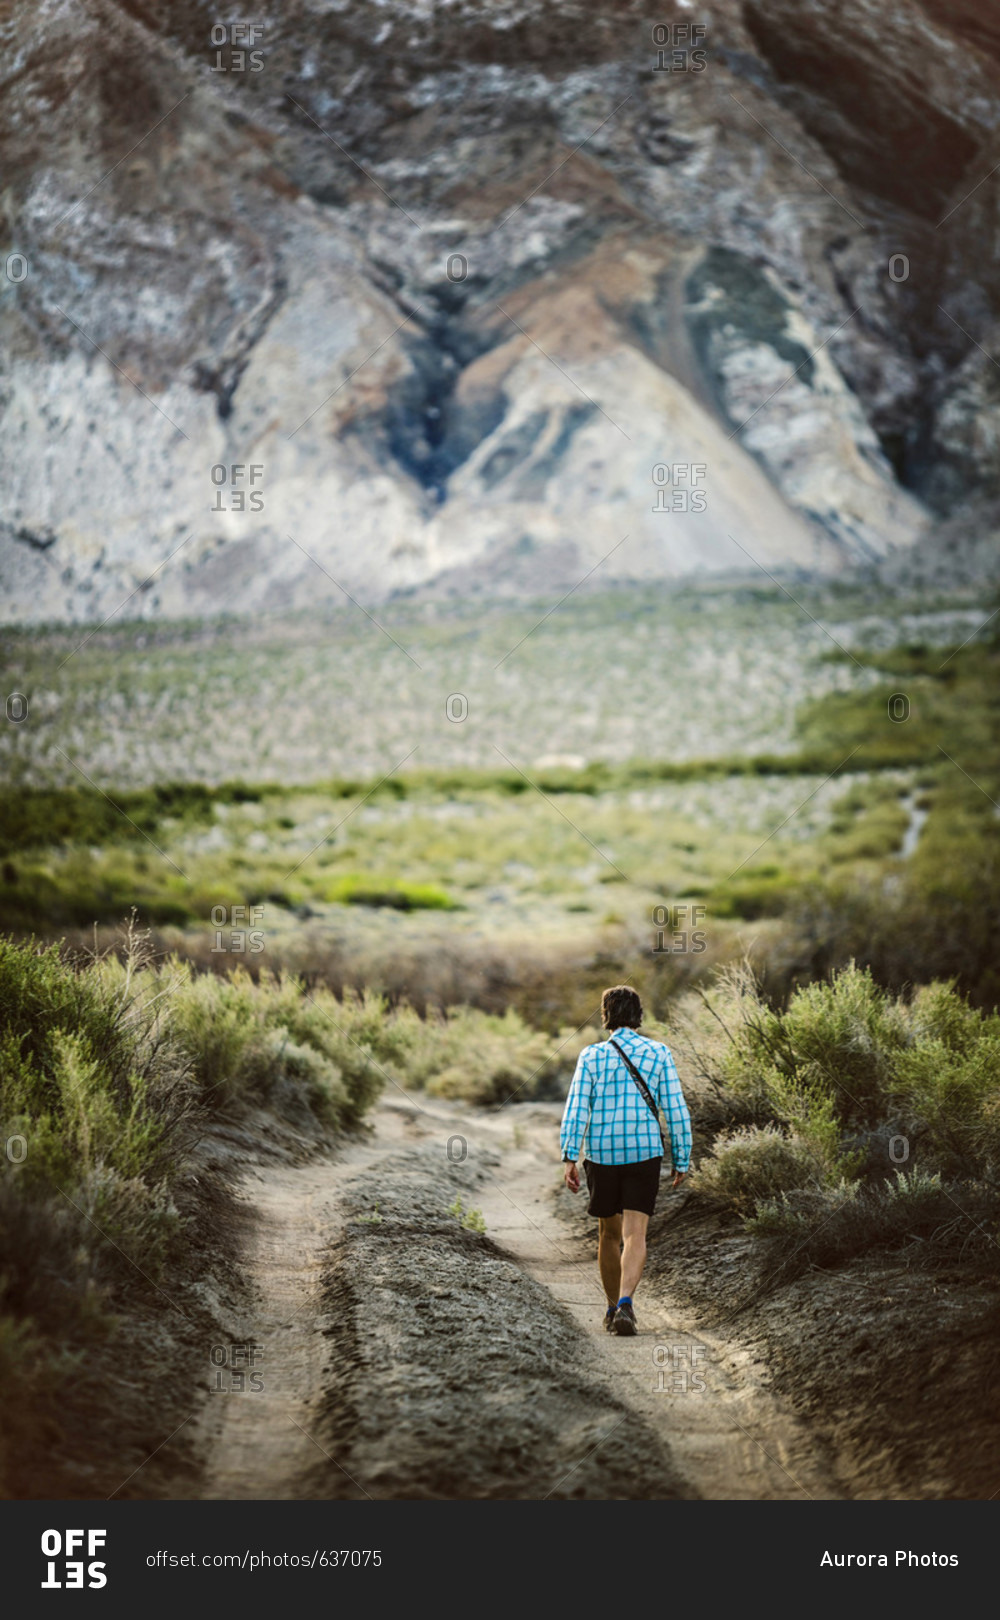 Rear view of lone woman walking on dirt road in desert in Saline Valley, Death Valley National Park, California, USA